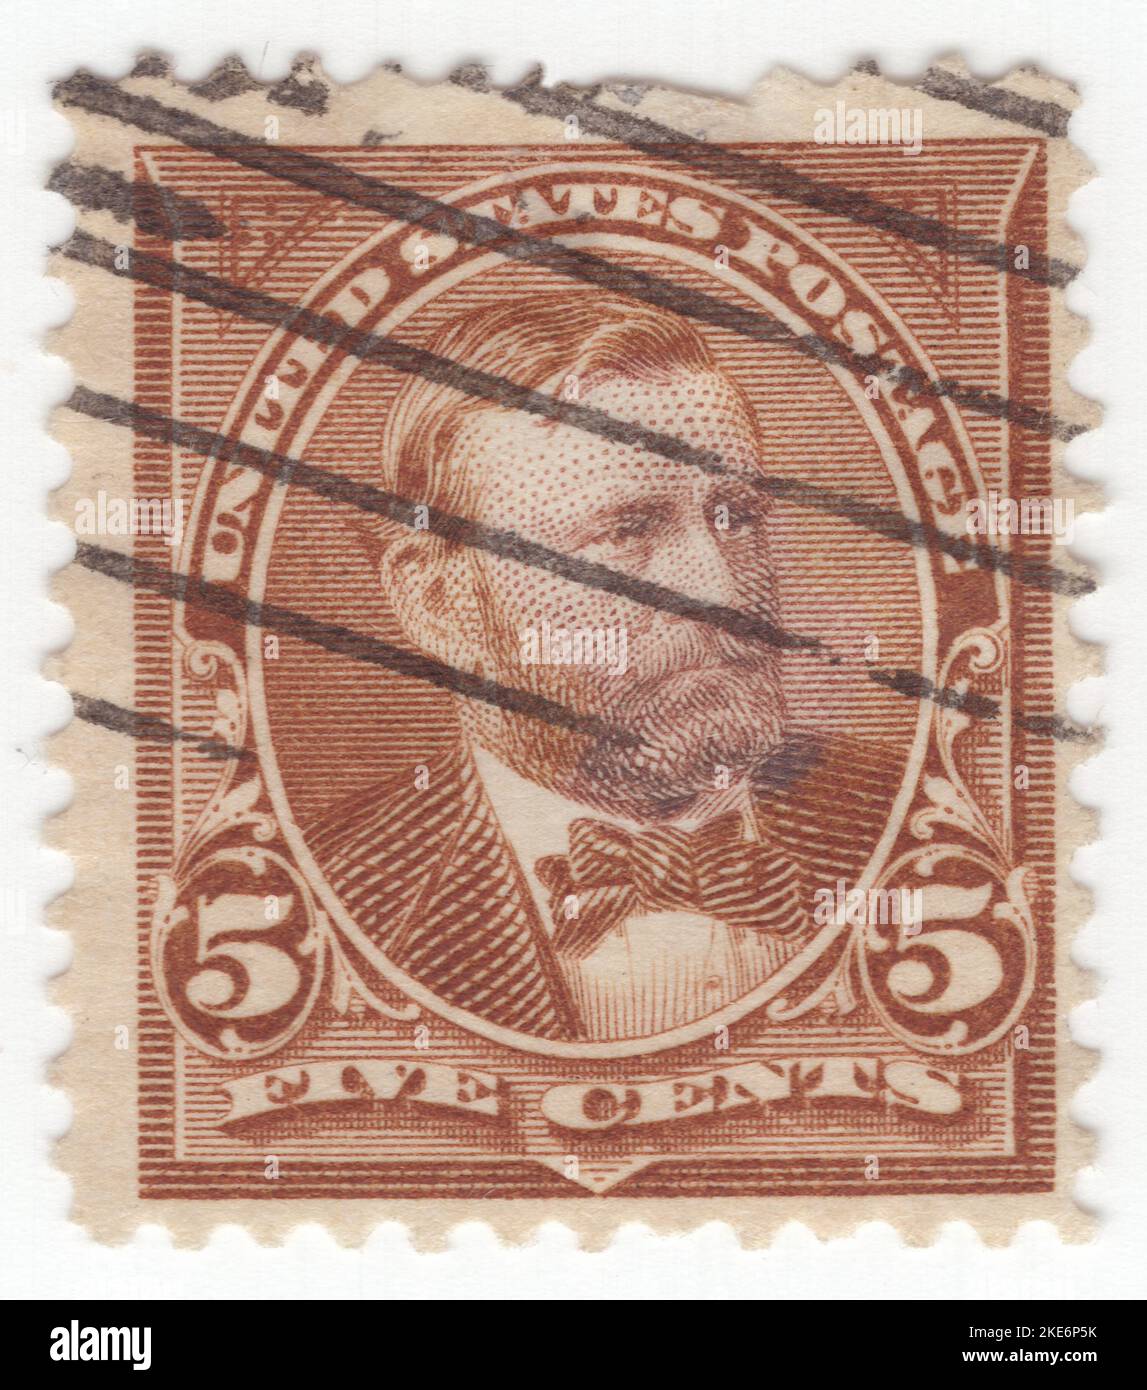 USA - 1894: An 5 cents chocolate postage stamp depicting portrait of Ulysses S. Grant (born Hiram Ulysses Grant), American military officer and politician who served as the 18th president of the United States from 1869 to 1877. As Commanding General, he led the Union Army to victory in the American Civil War in 1865 and thereafter briefly served as Secretary of War. Later, as president, Grant was an effective civil rights executive who signed the bill that created the Justice Department and worked with Radical Republicans to protect African Americans during Reconstruction Stock Photo